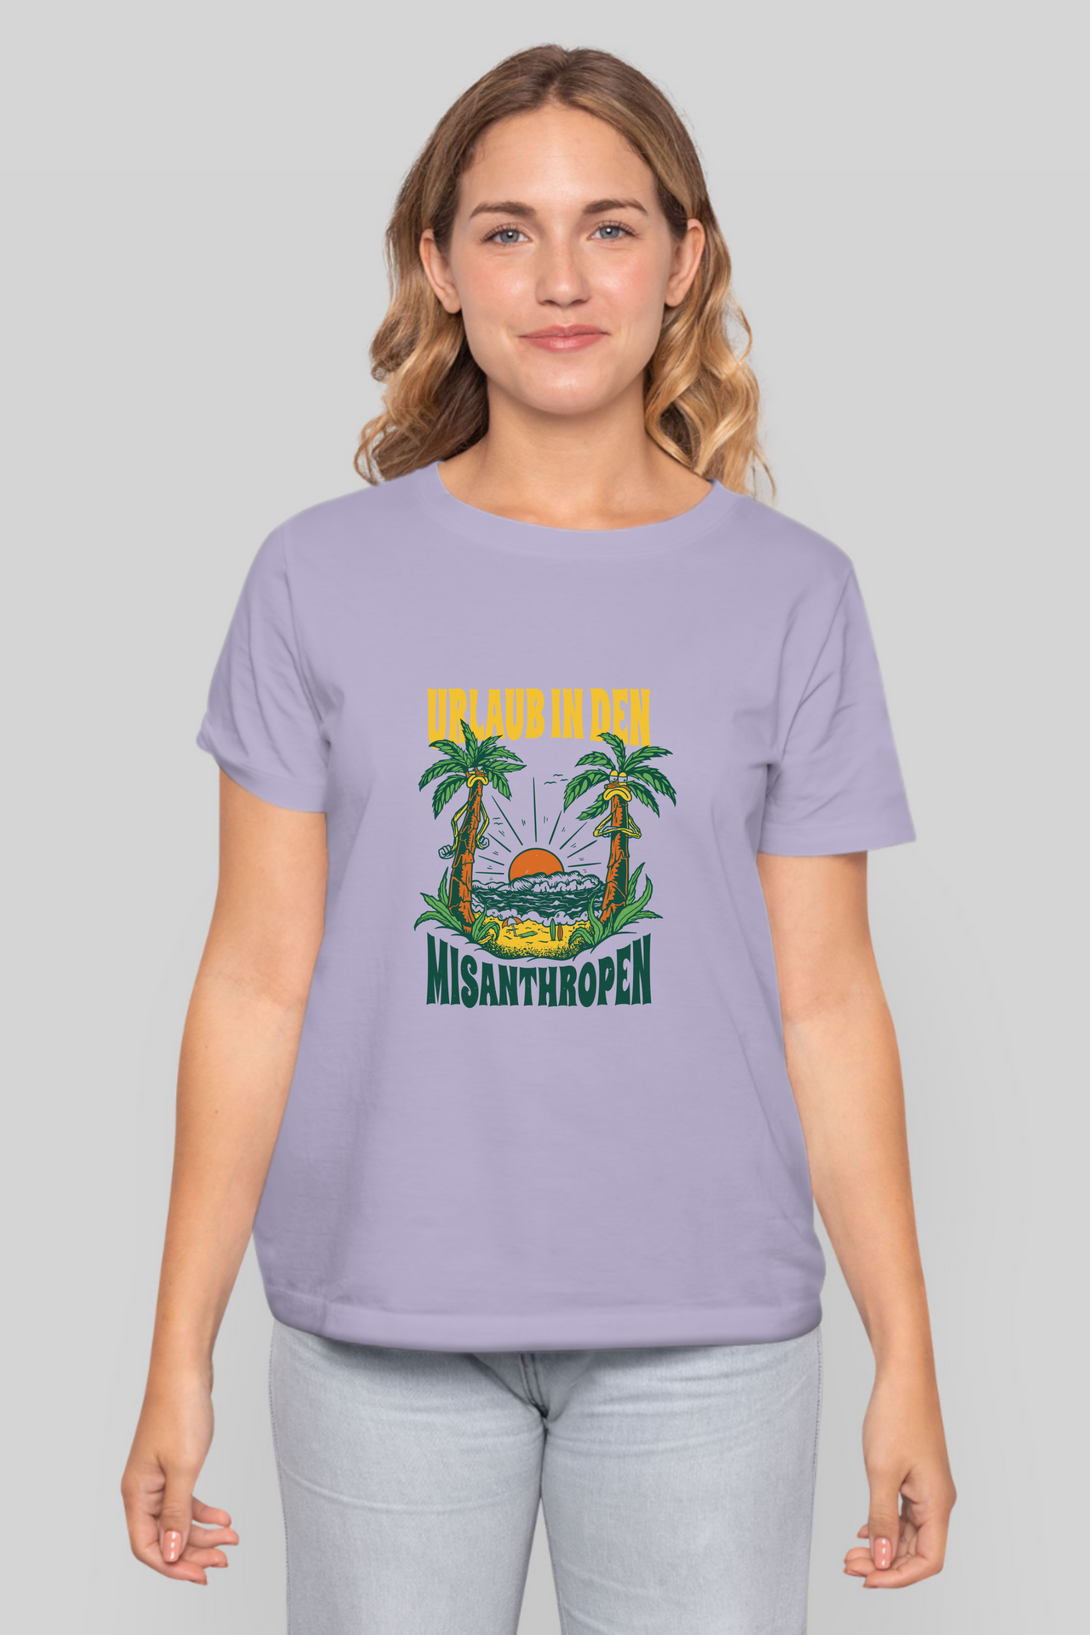 Vacation Away From People Printed T-Shirt For Women - WowWaves - 9